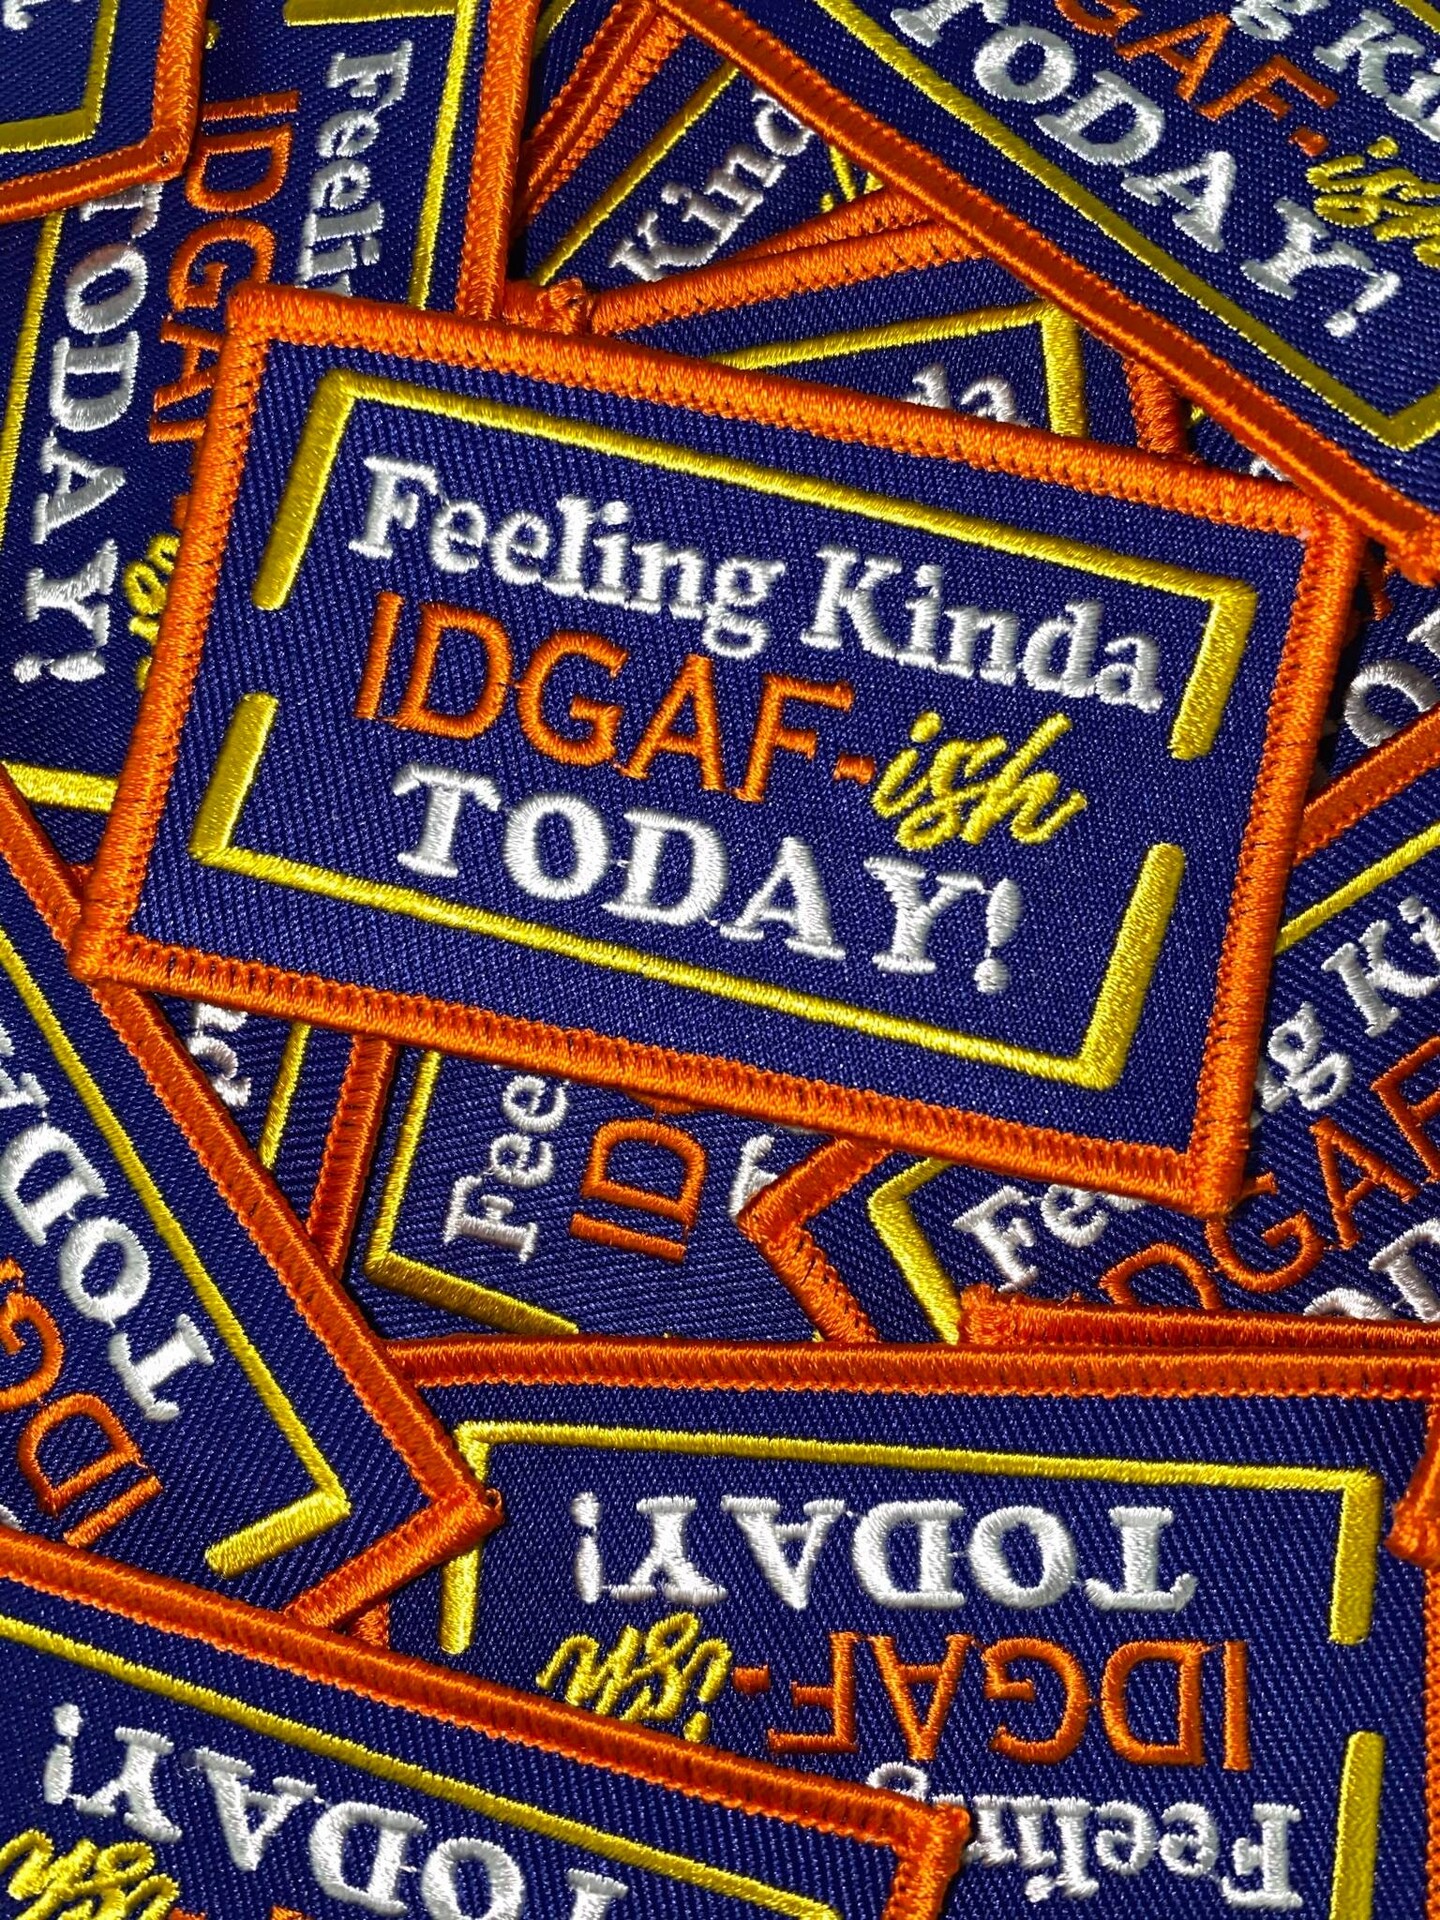 &#x22;Feeling Kinda IDGAF-ish Today&#x22; Funny Statement Badge, Iron-on Embroidered Patch, Size 3&#x22;x2&#x22; inches